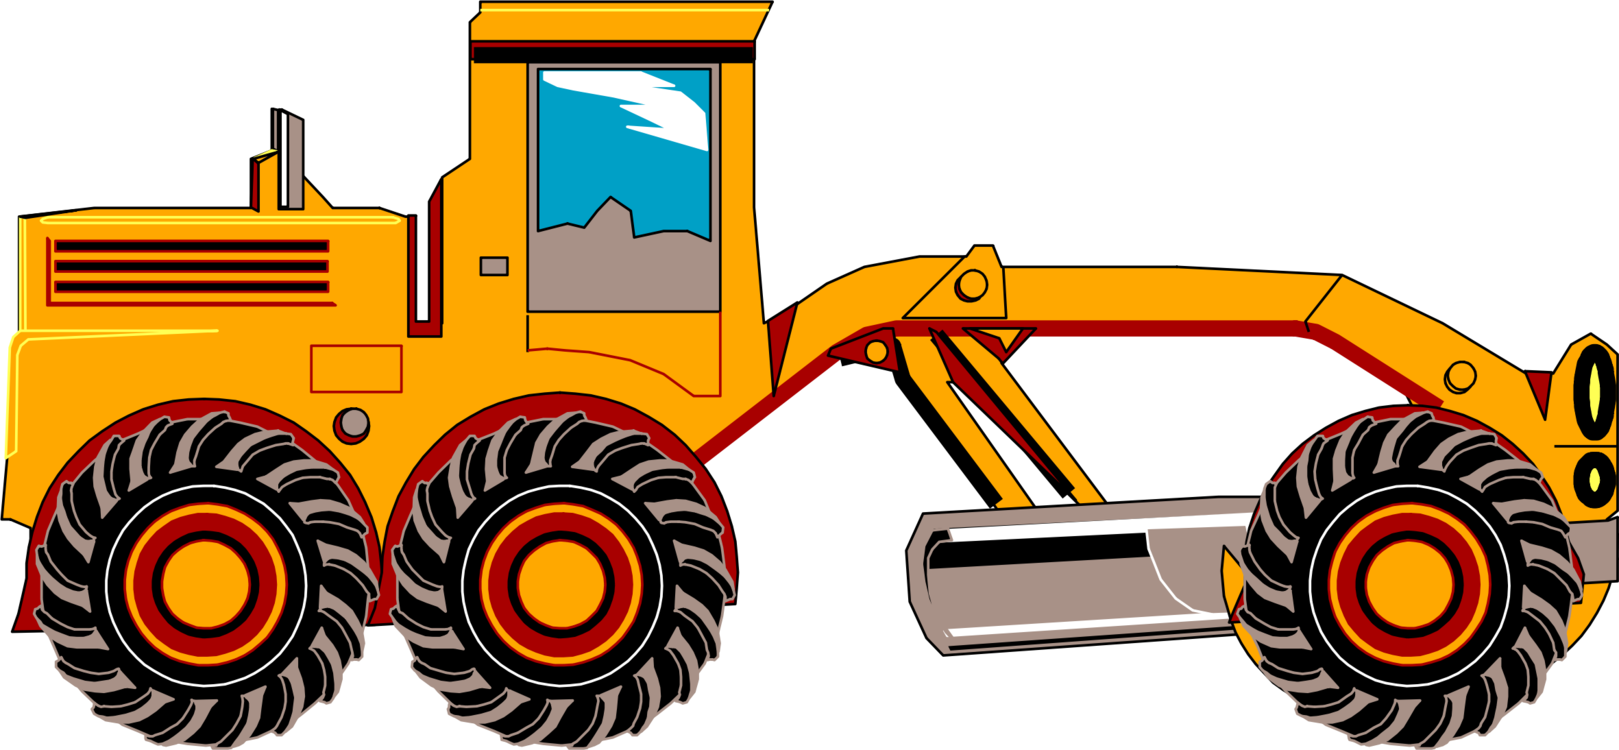 Construction Machine and Equipment Clip Art for Scrapbooking Card ...